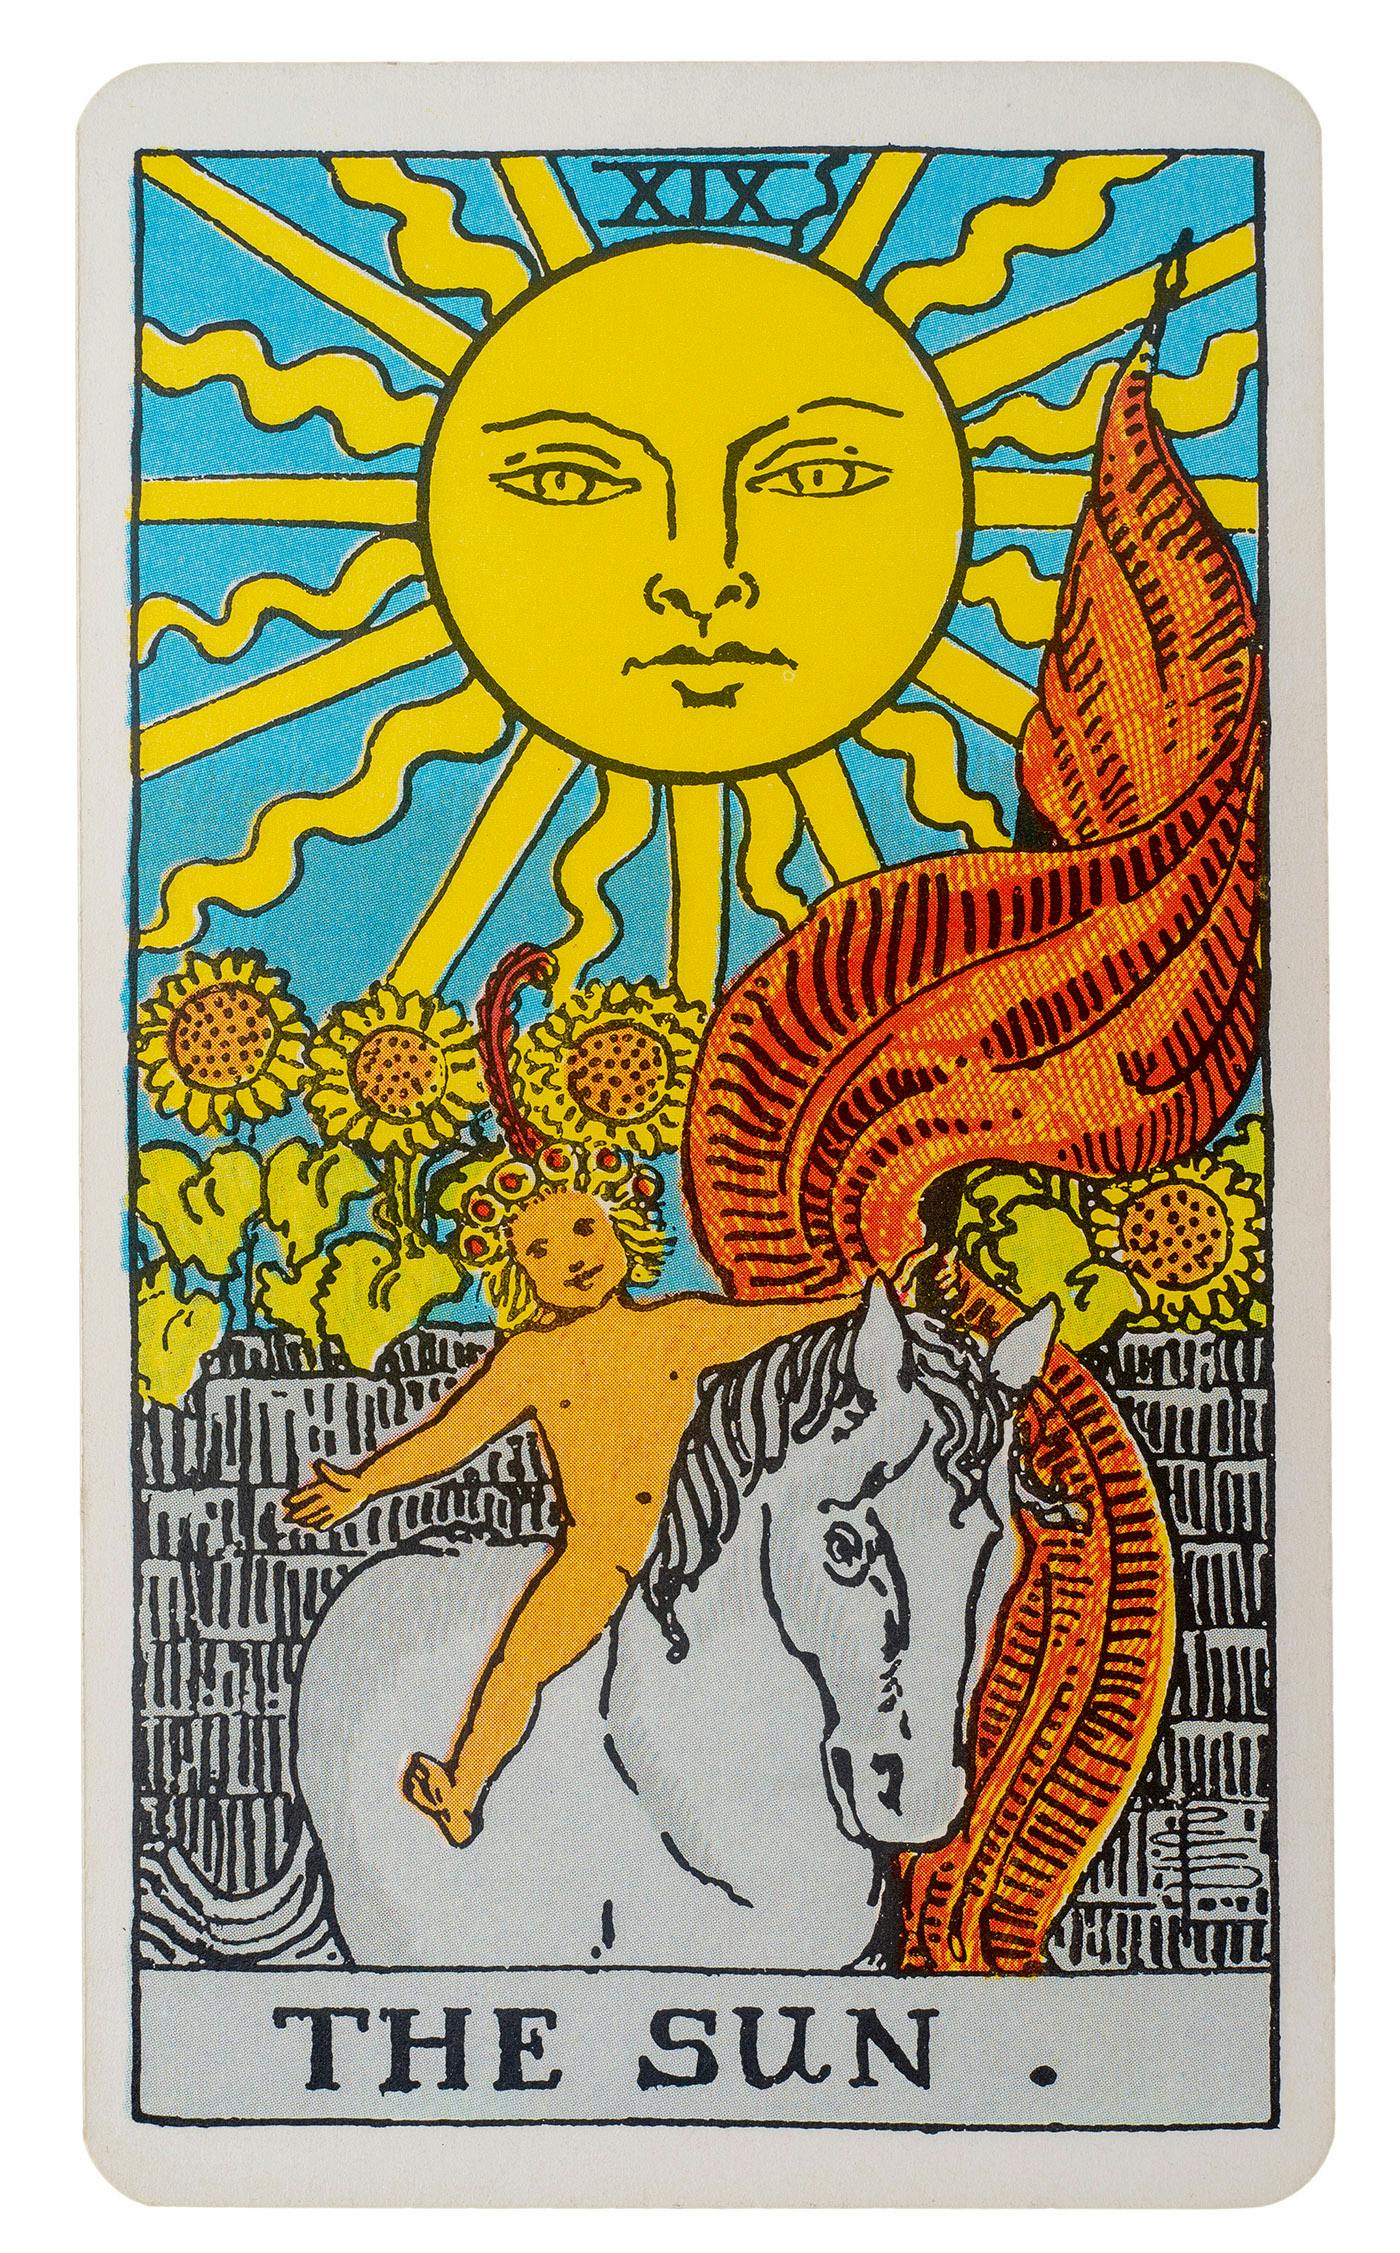 the sun card from the rider-waite deck. Image of a baby rising a horse with the sun and sunflowers in the background.